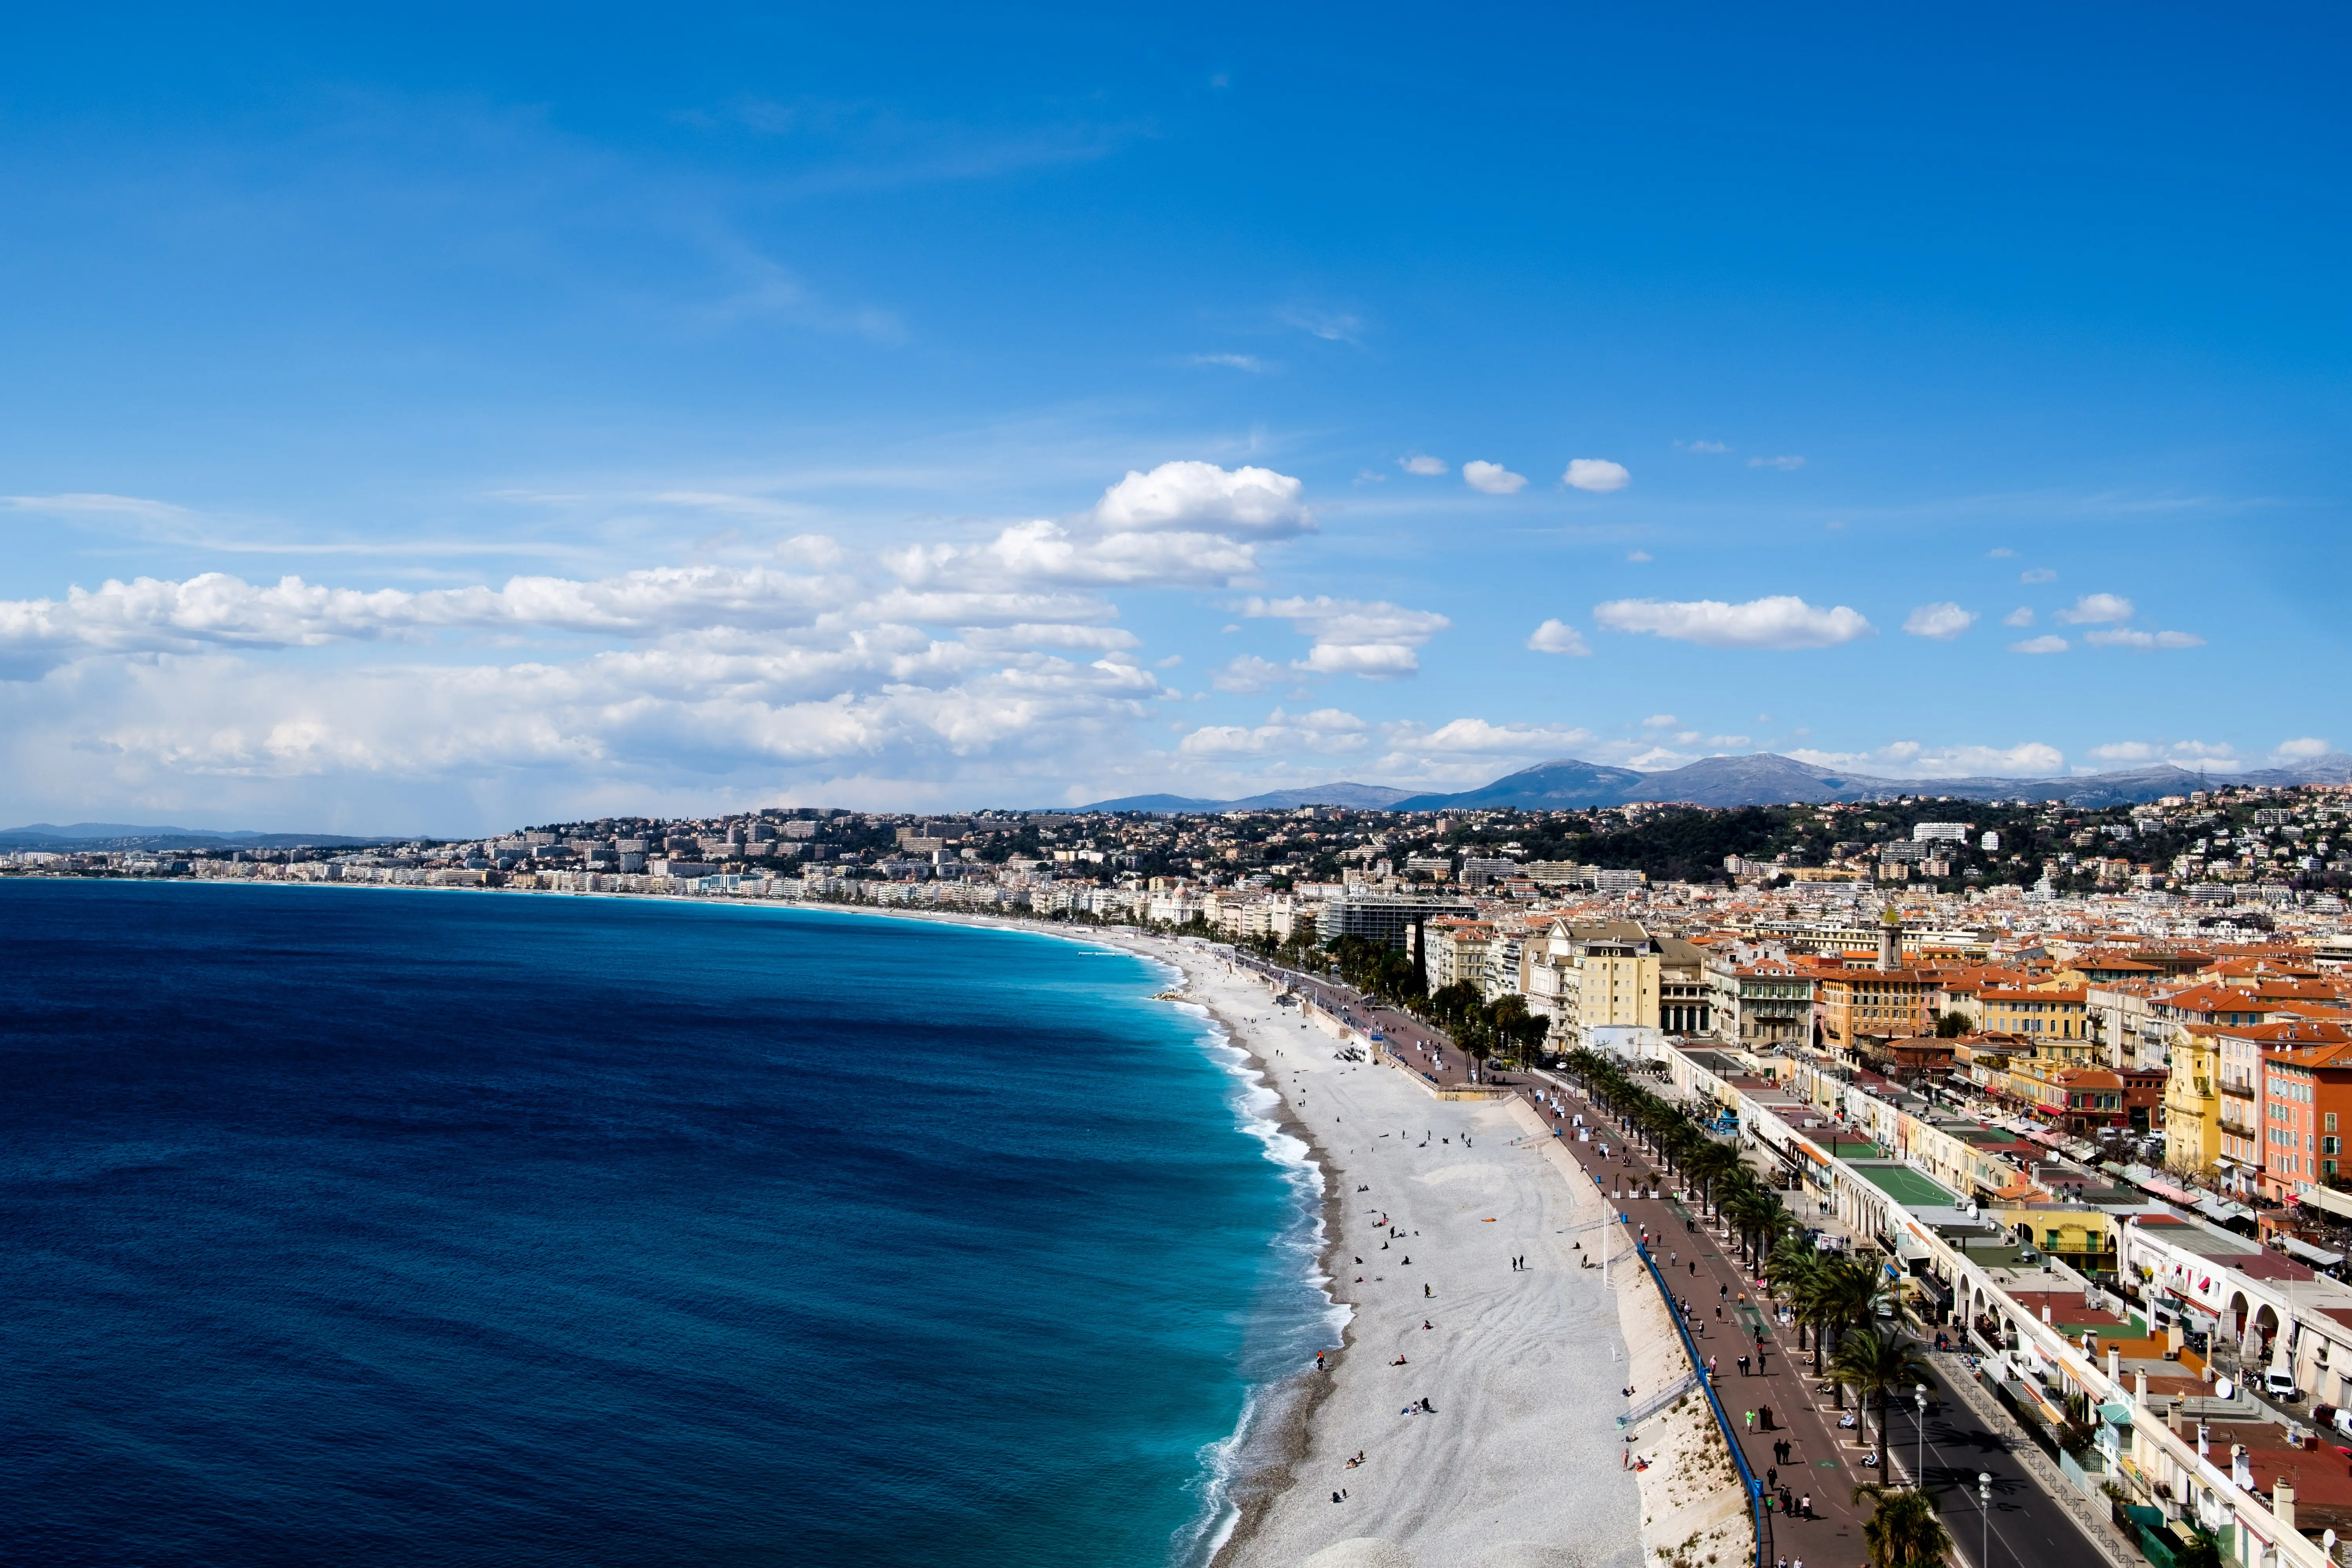 View from the hill in Nice on the French Riviera, France